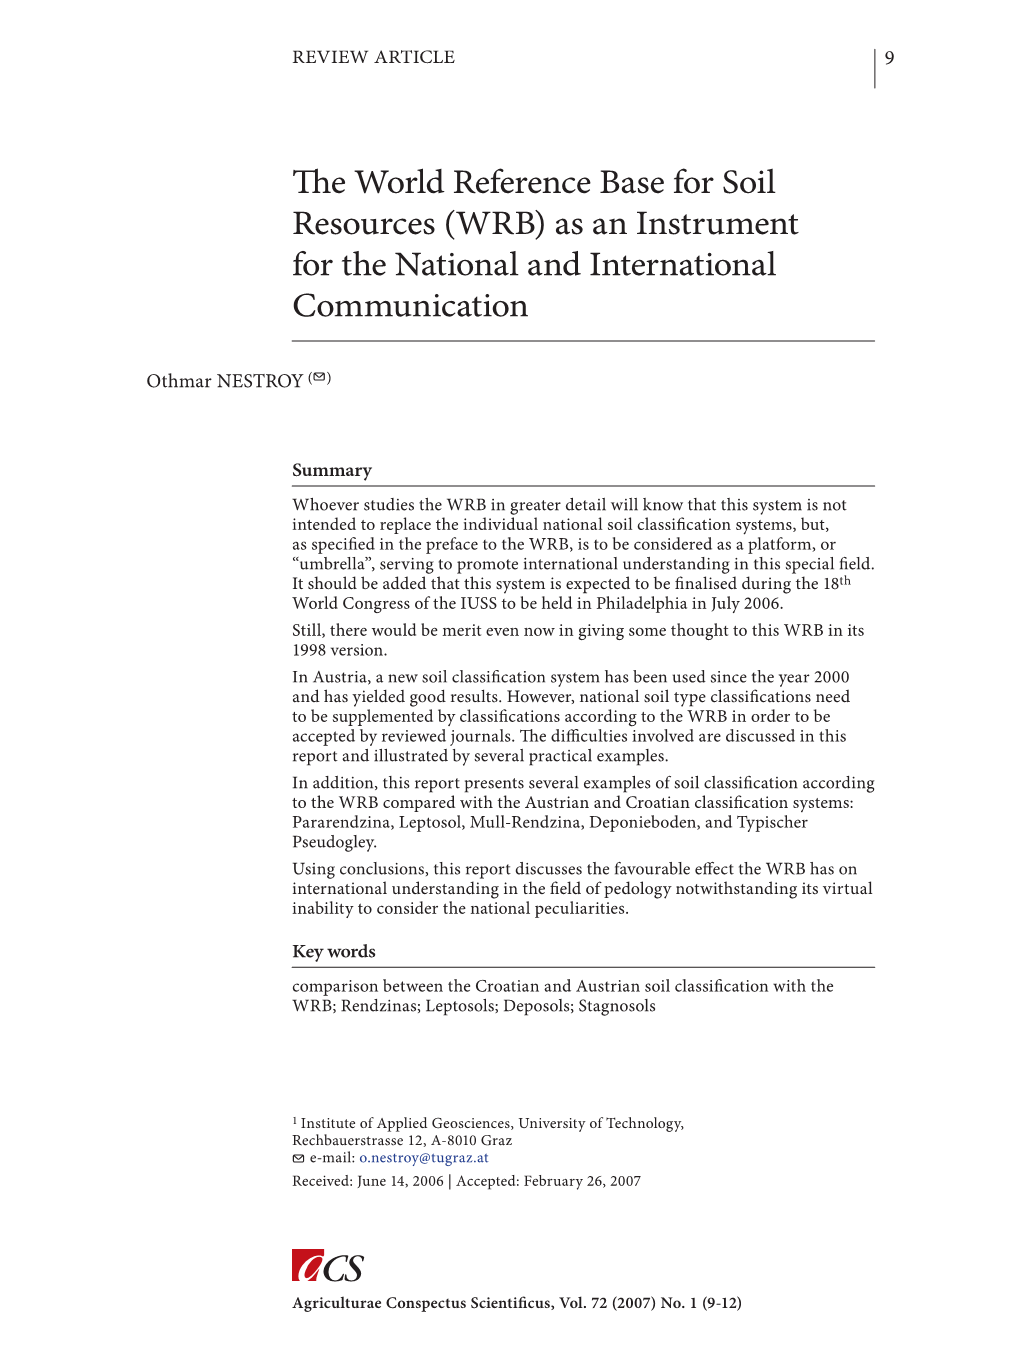 The World Reference Base for Soil Resources (WRB) As an Instrument for the National and International Communication 11